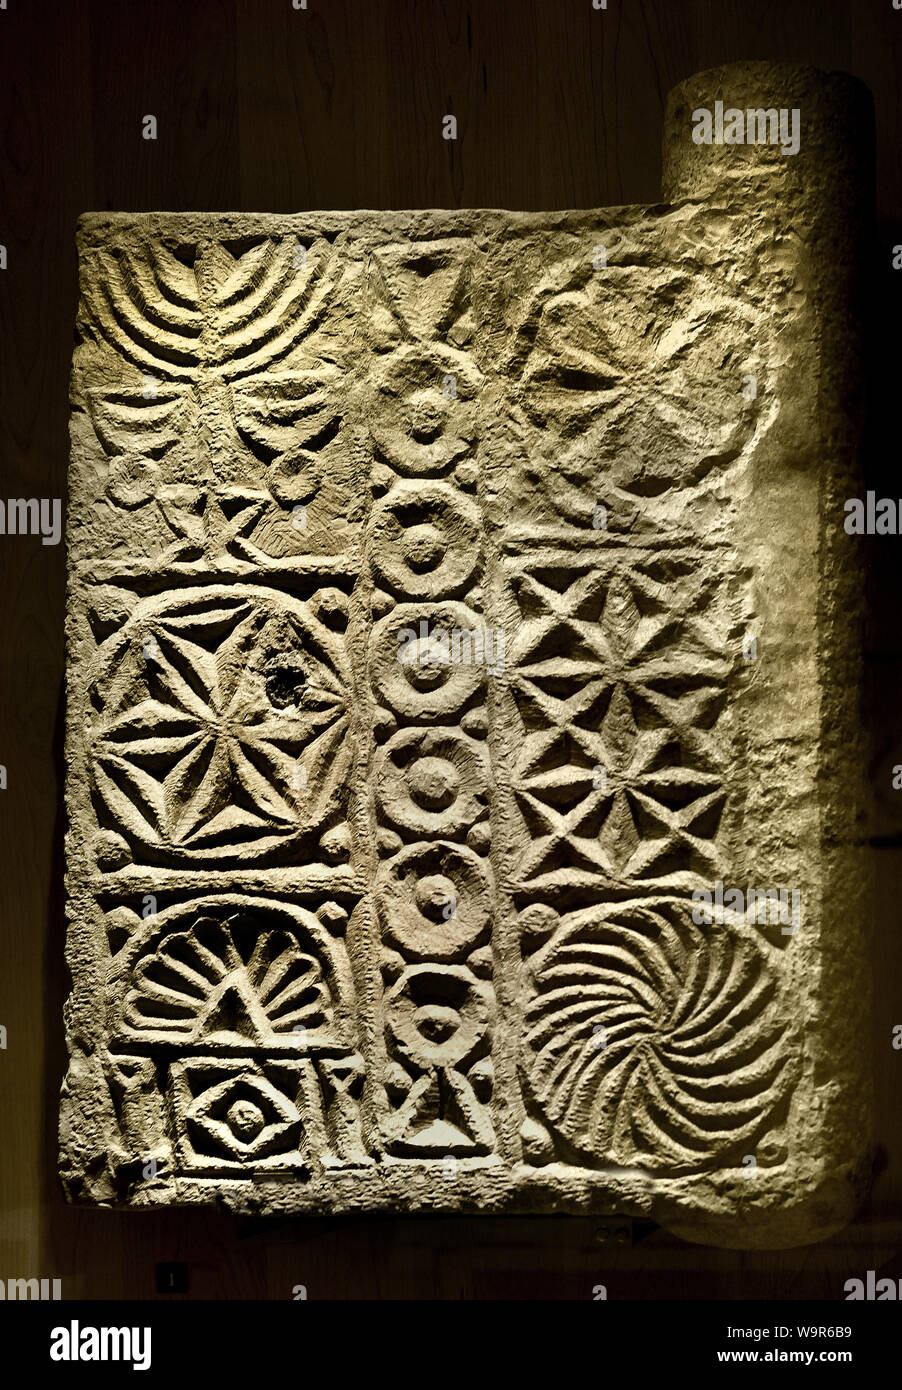 Tomb door with carved decoration 3rd-4th century AD AD Kefr Yâsif, near Saint-Jean-d'Acre (Israel) Limestone. (The decoration of this door is characteristic of the iconography present in the Jewish tombs of Palestine) Stock Photo